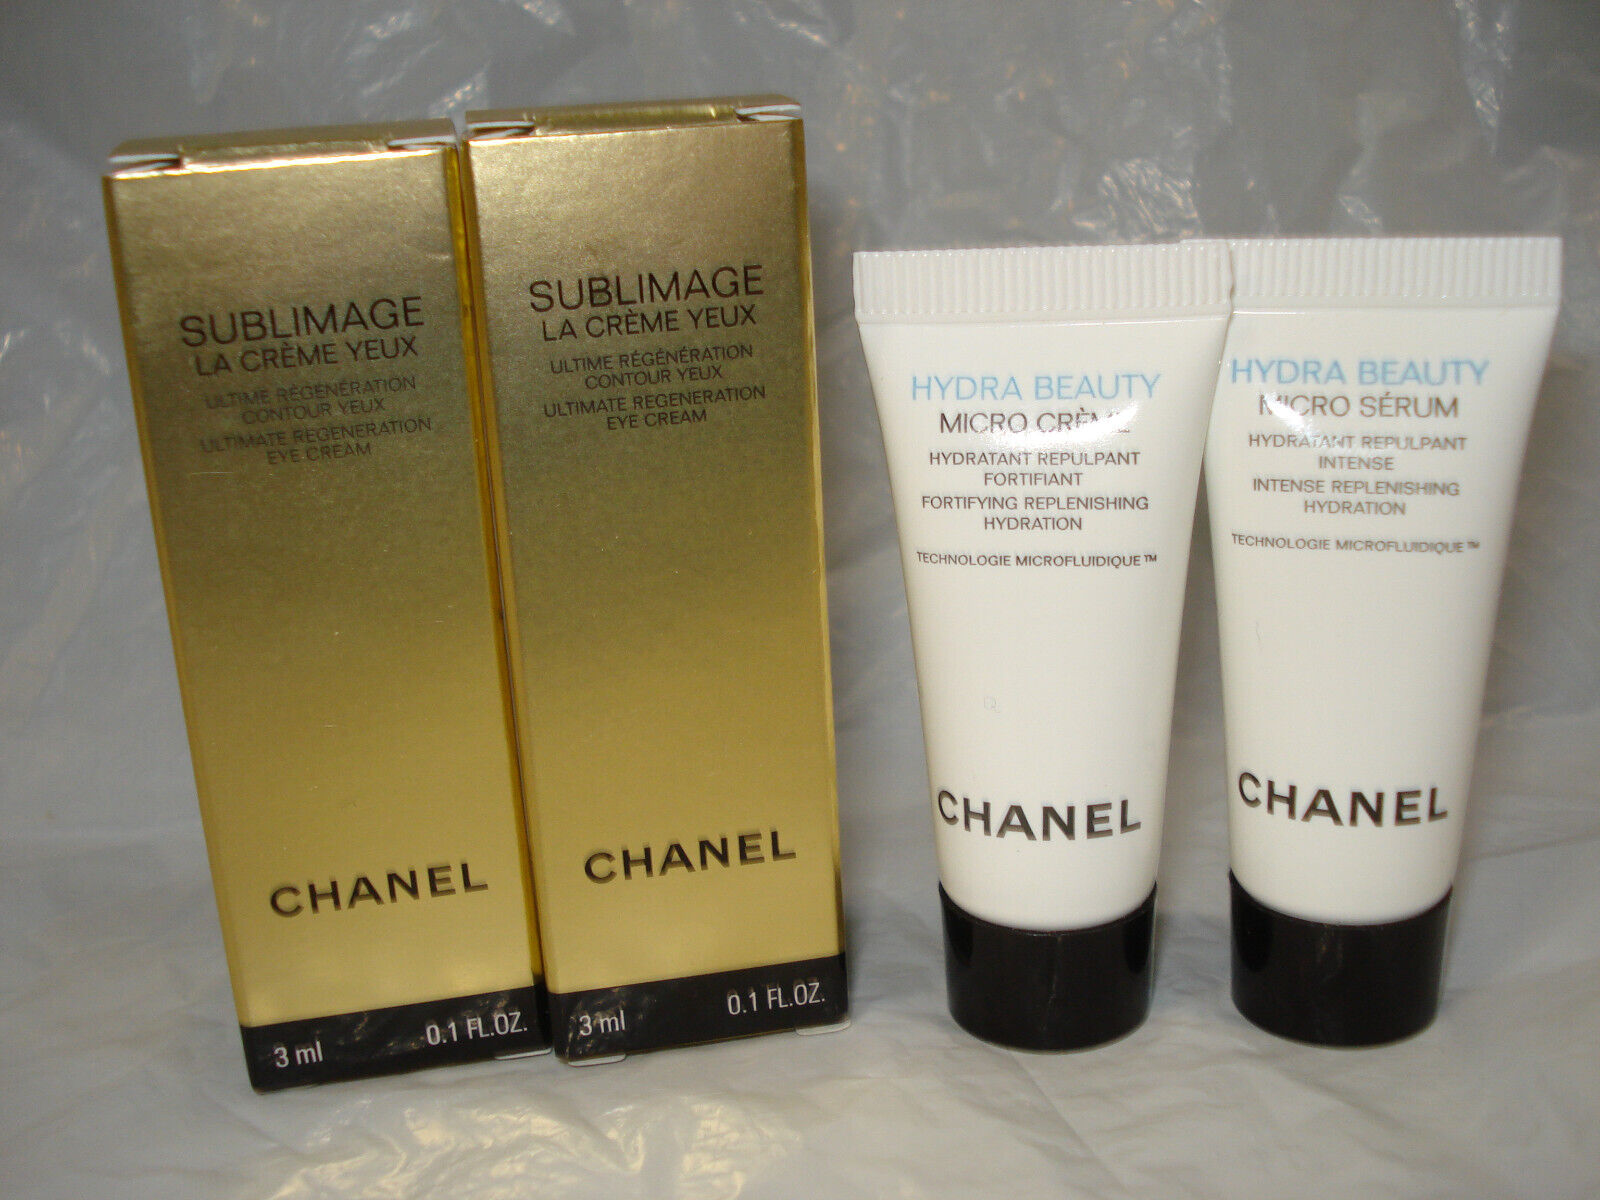 CHANEL LOT OF SAMPLES Sublimage 2 eye cream and Hydra beauty crem